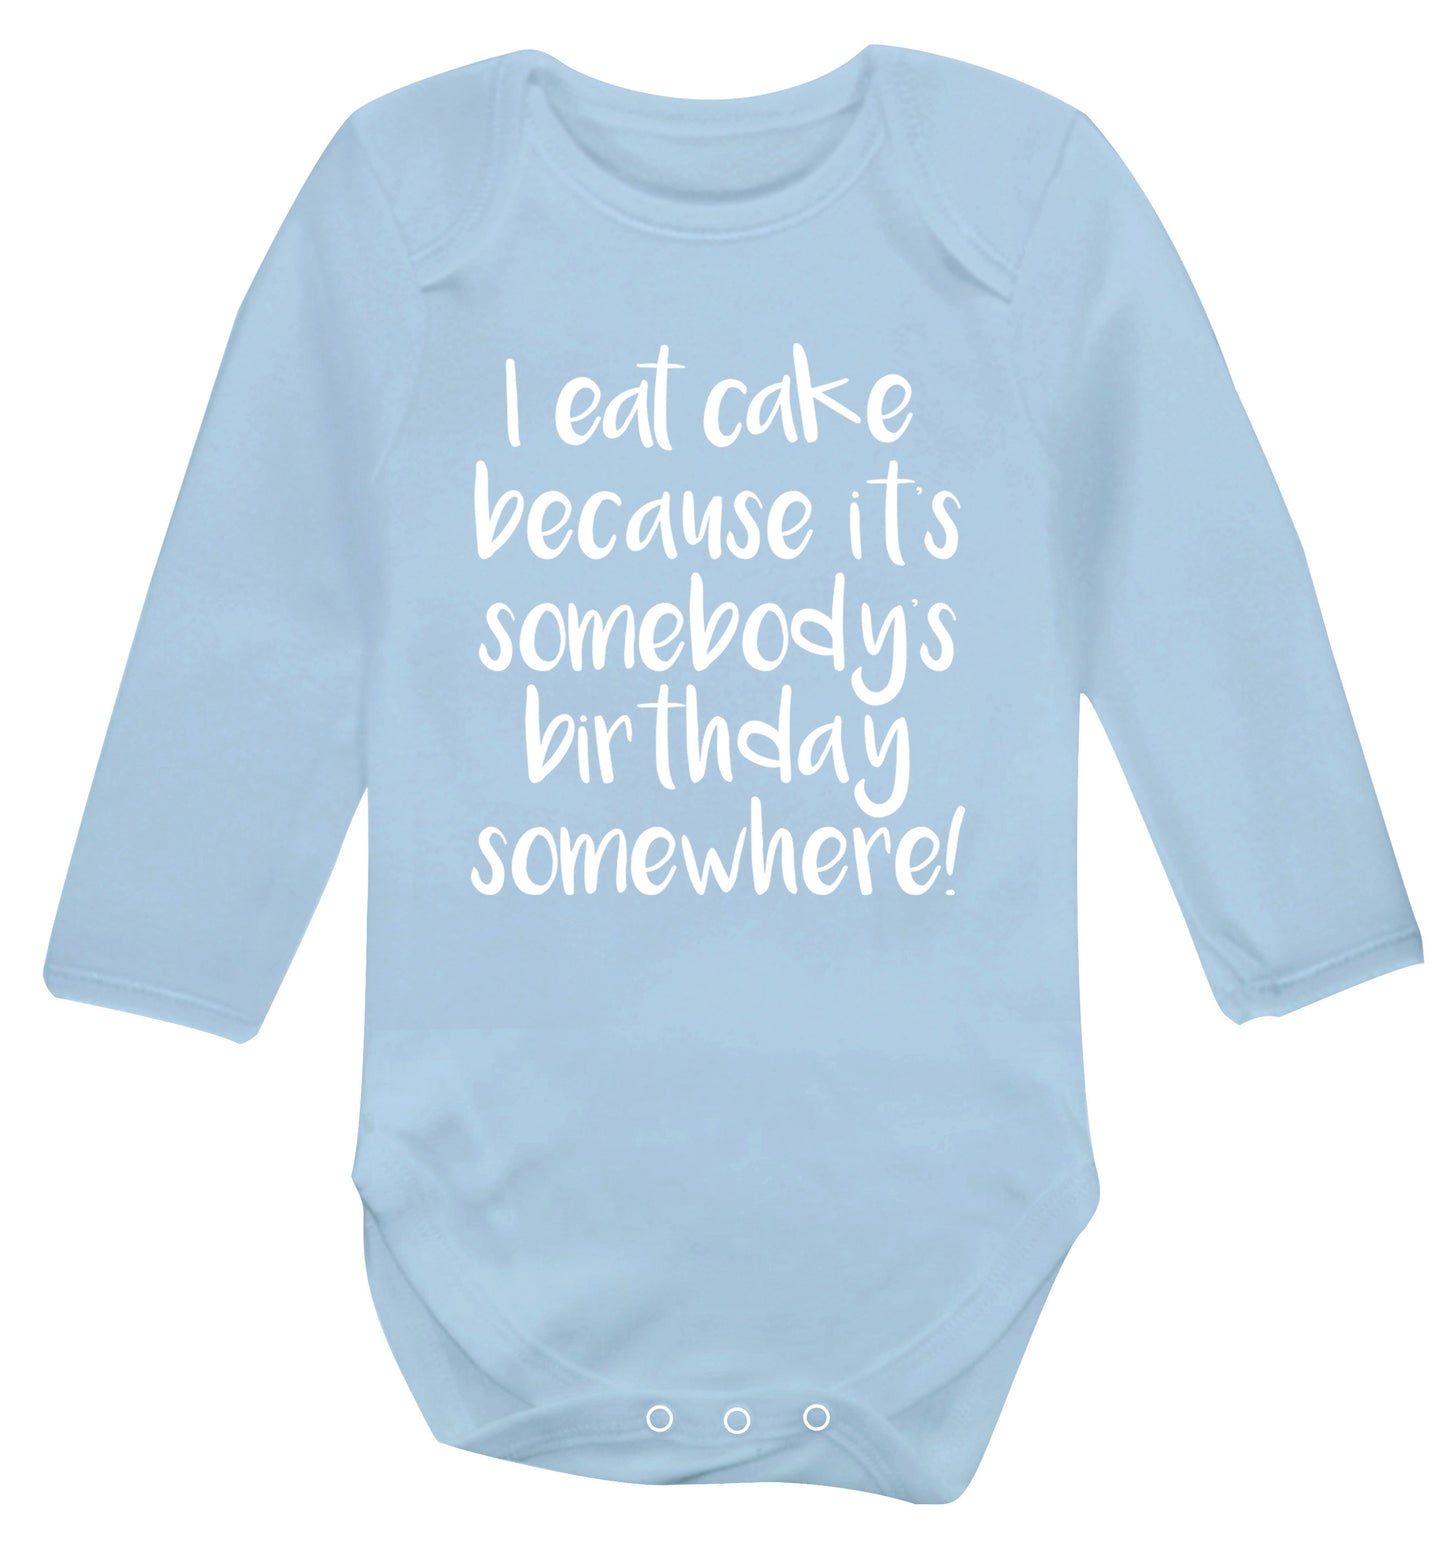 I eat cake because it's somebody's birthday somewhere! Baby Vest long sleeved pale blue 6-12 months